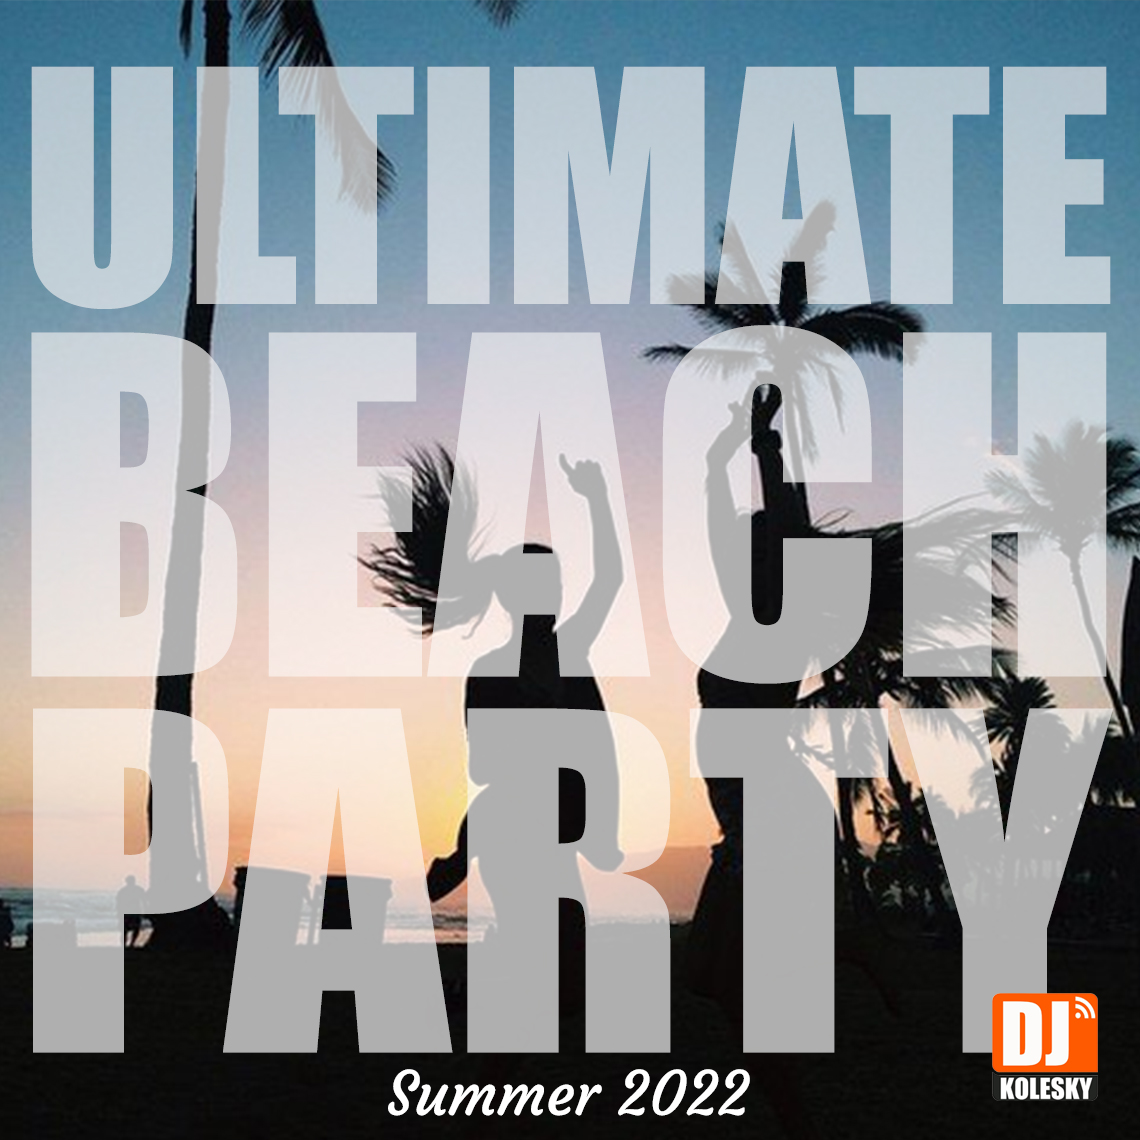 ULTIMATE BEACH PARTY - SUMMER 2022